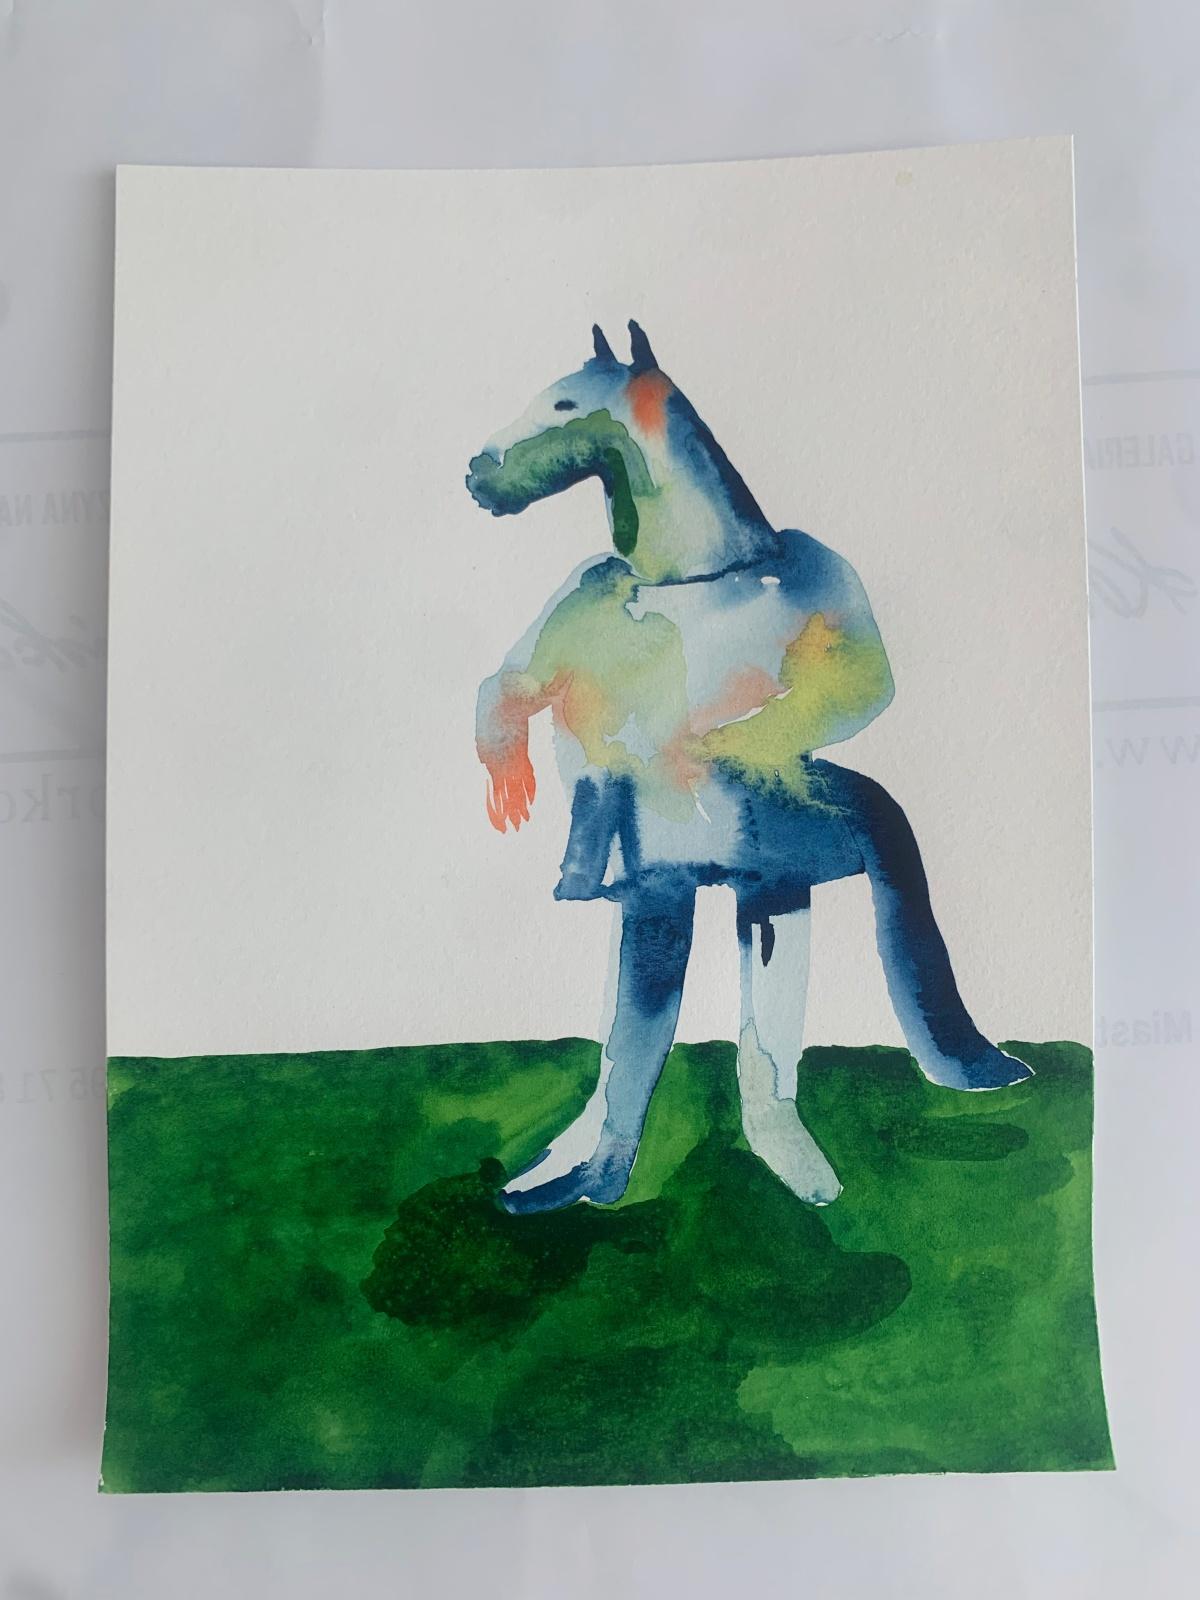 Contemporary figurative watercolor on paper painting by Polish artist living in Belgium Hanna Ilczyszyn. Artwork depicts a fantastic horse-like creature. Painting is colorful. It was created during art residency stay in Sardinia. 

HANNA ILCZYSZYN